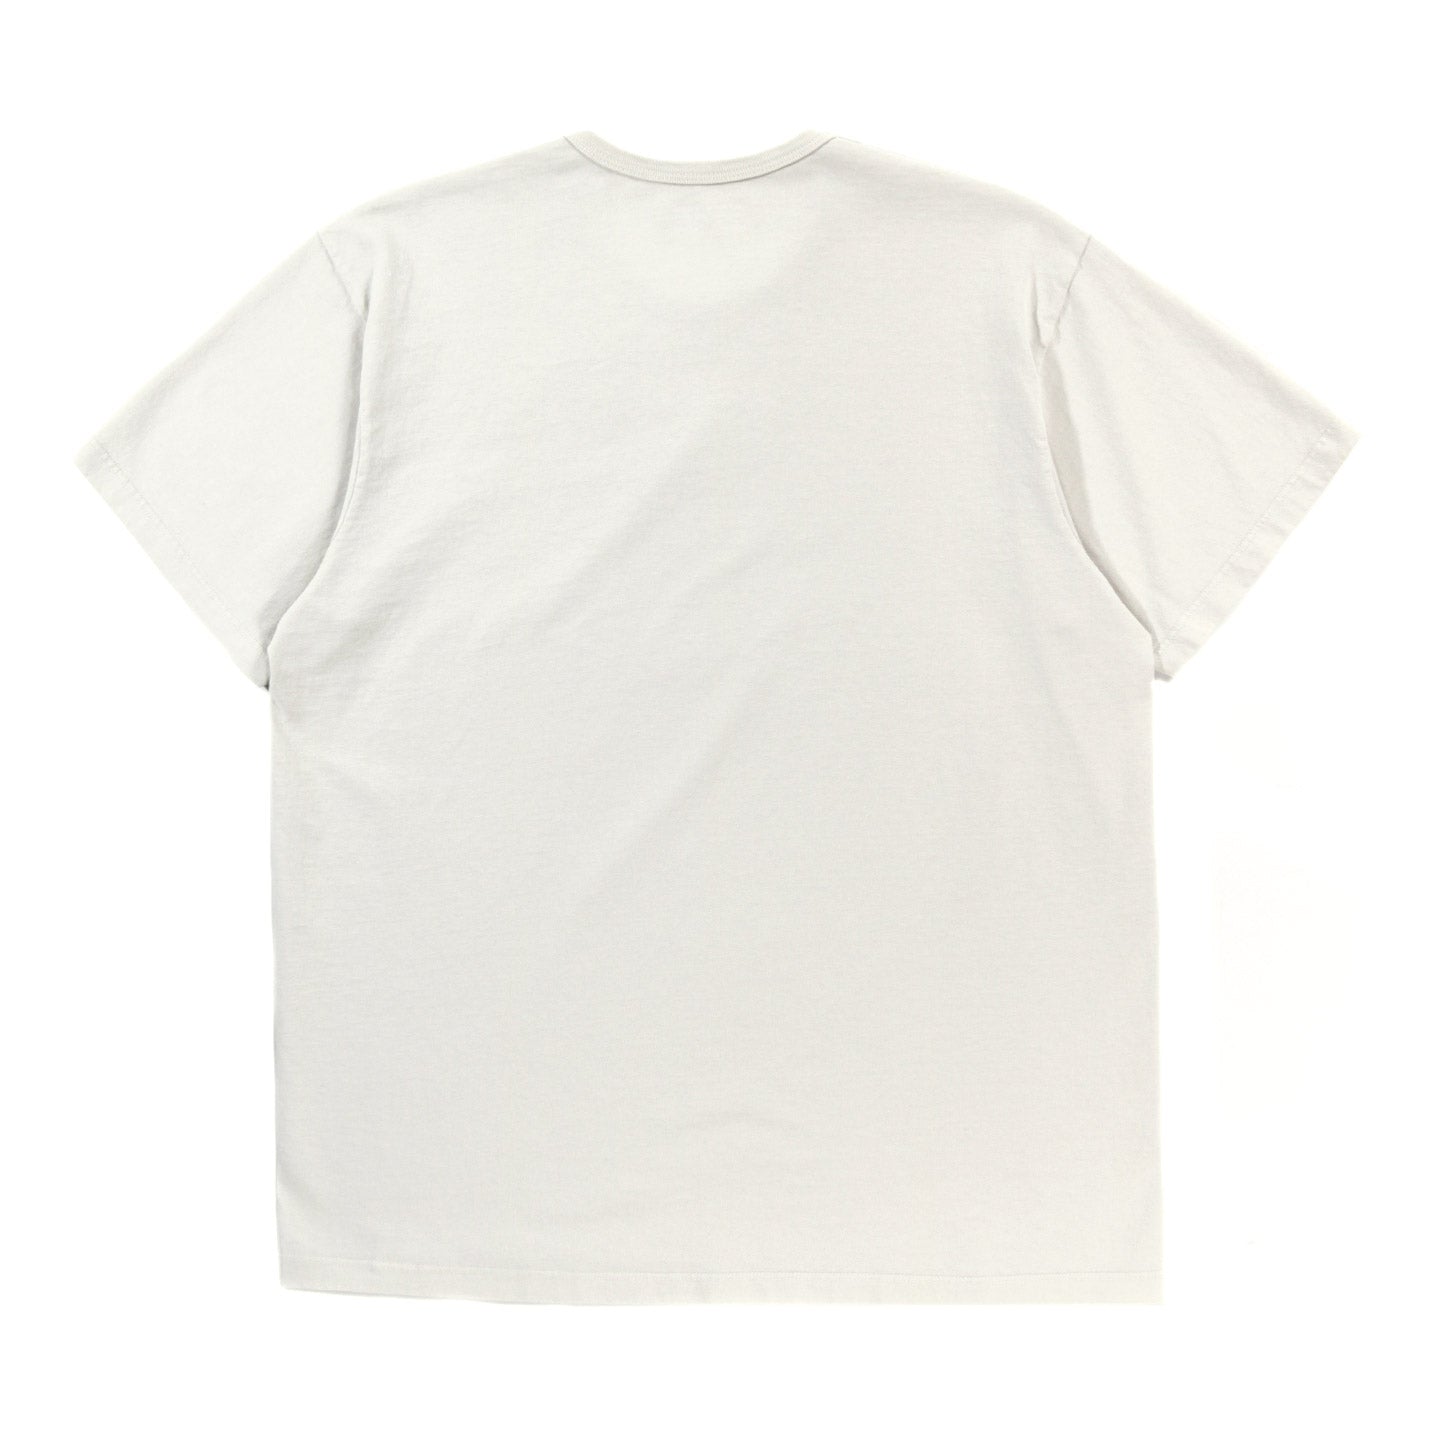 LADY WHITE CO. T-SHIRT 2-PACK OFF WHITE